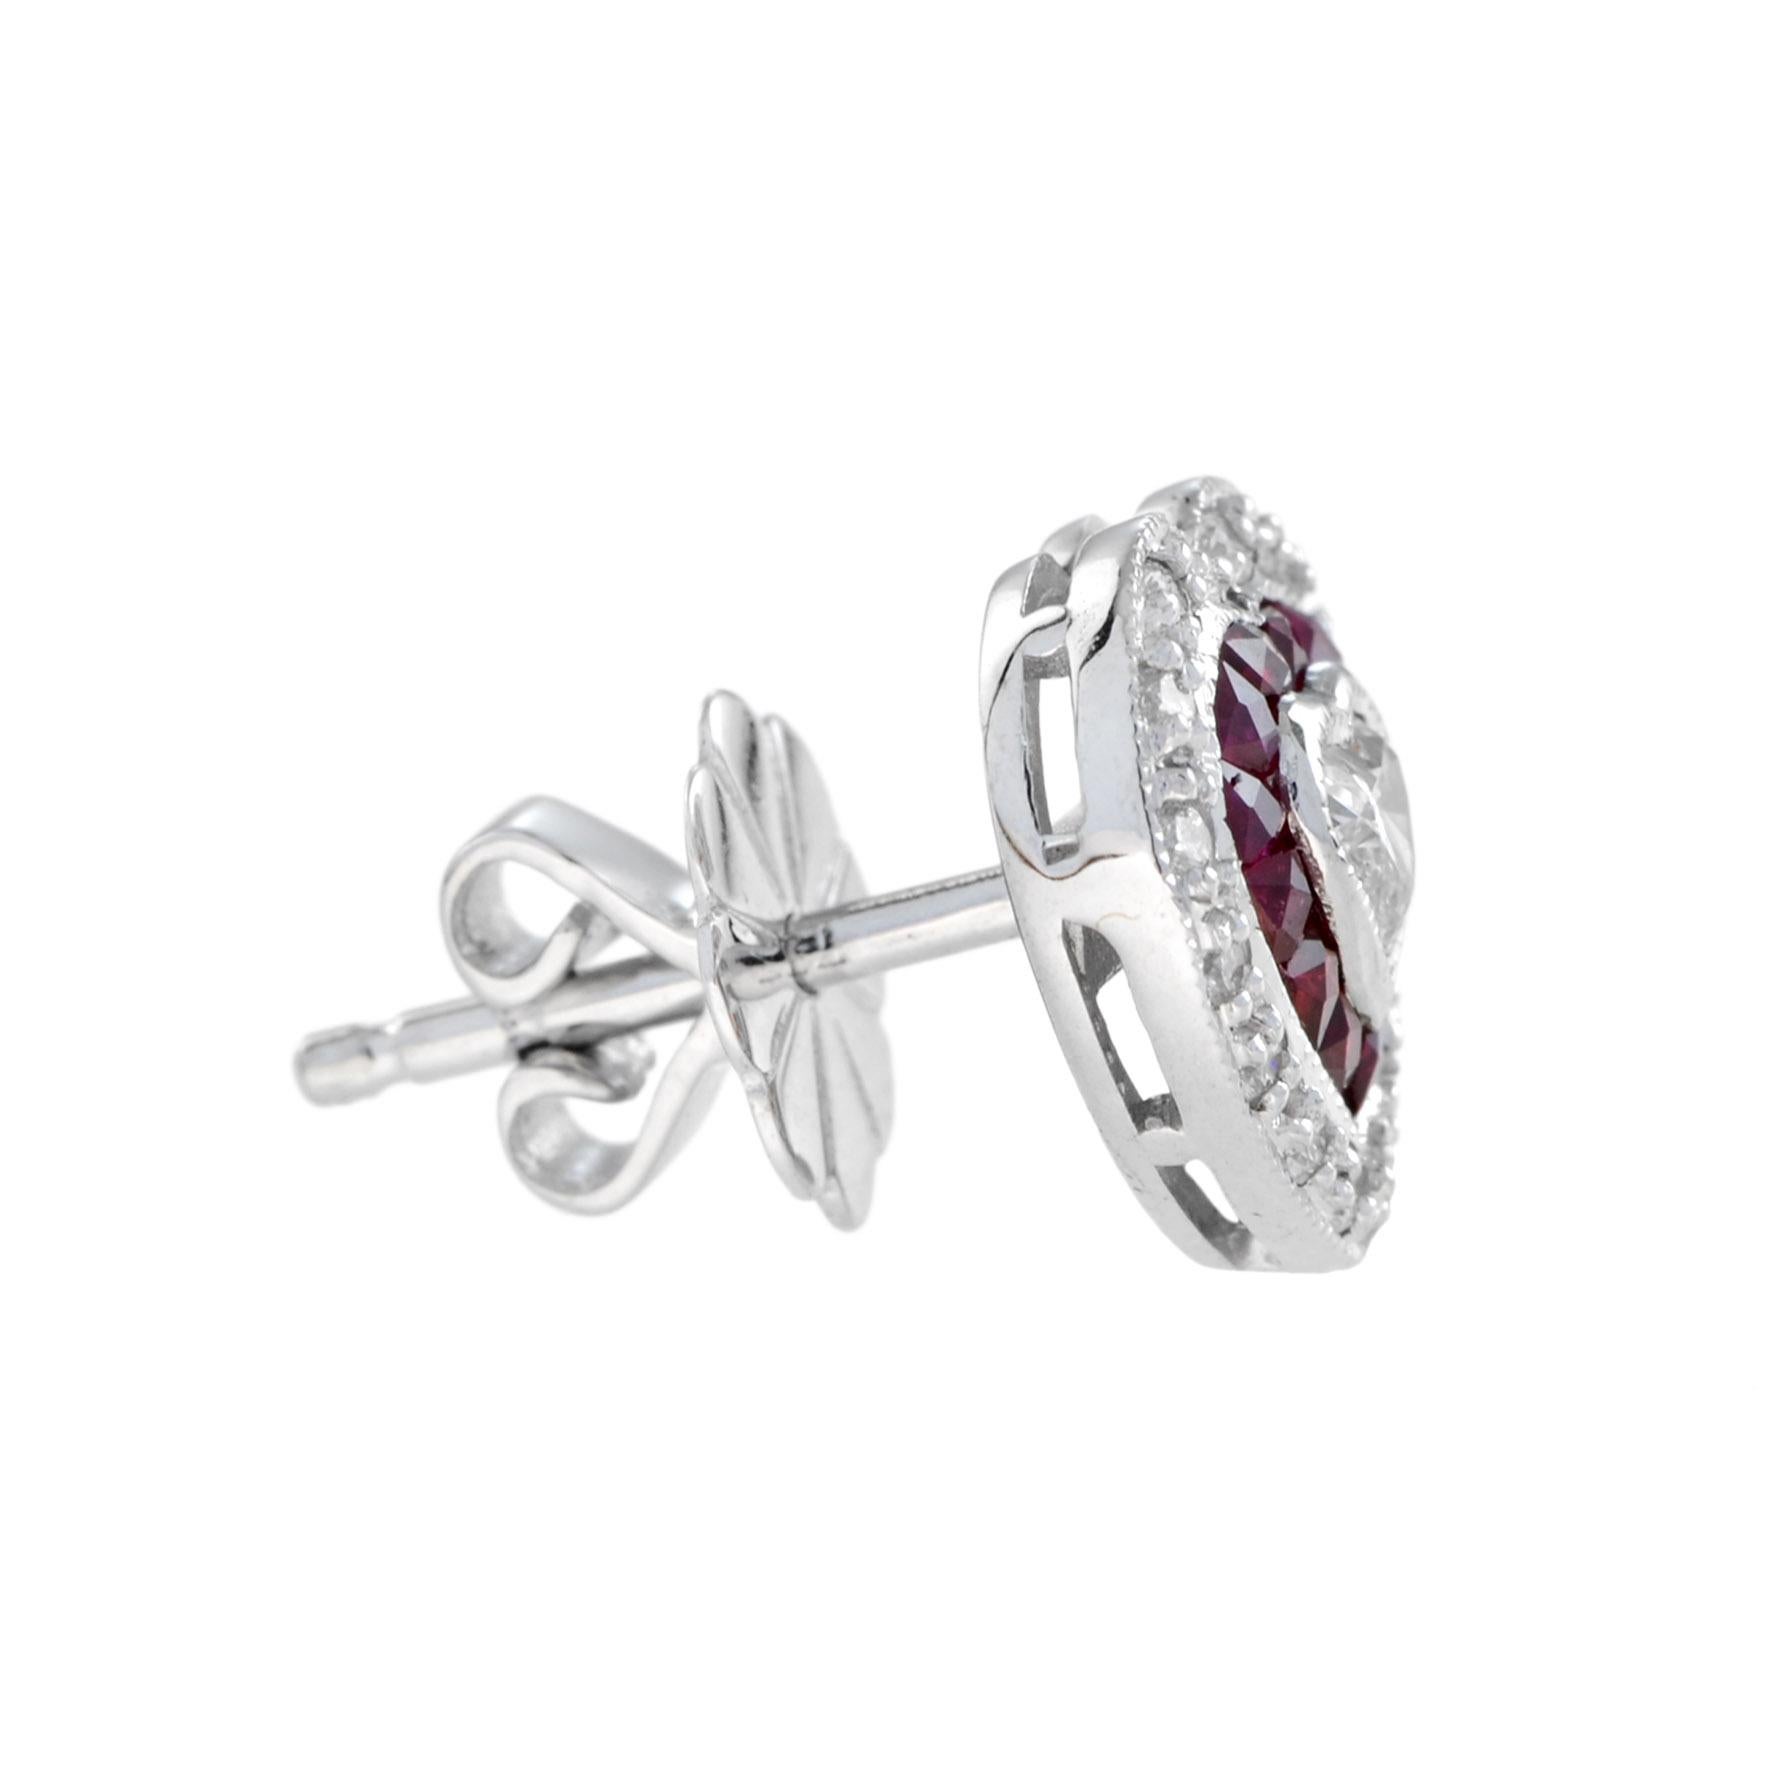 Crafted in 14k white gold, these lovely heart shaped stud earrings offer a beautiful combination of sophistication and charm. The center heart shaped diamonds weigh .25 carat in total and grade G color, VS clarity. A frame of French cut rubies, and